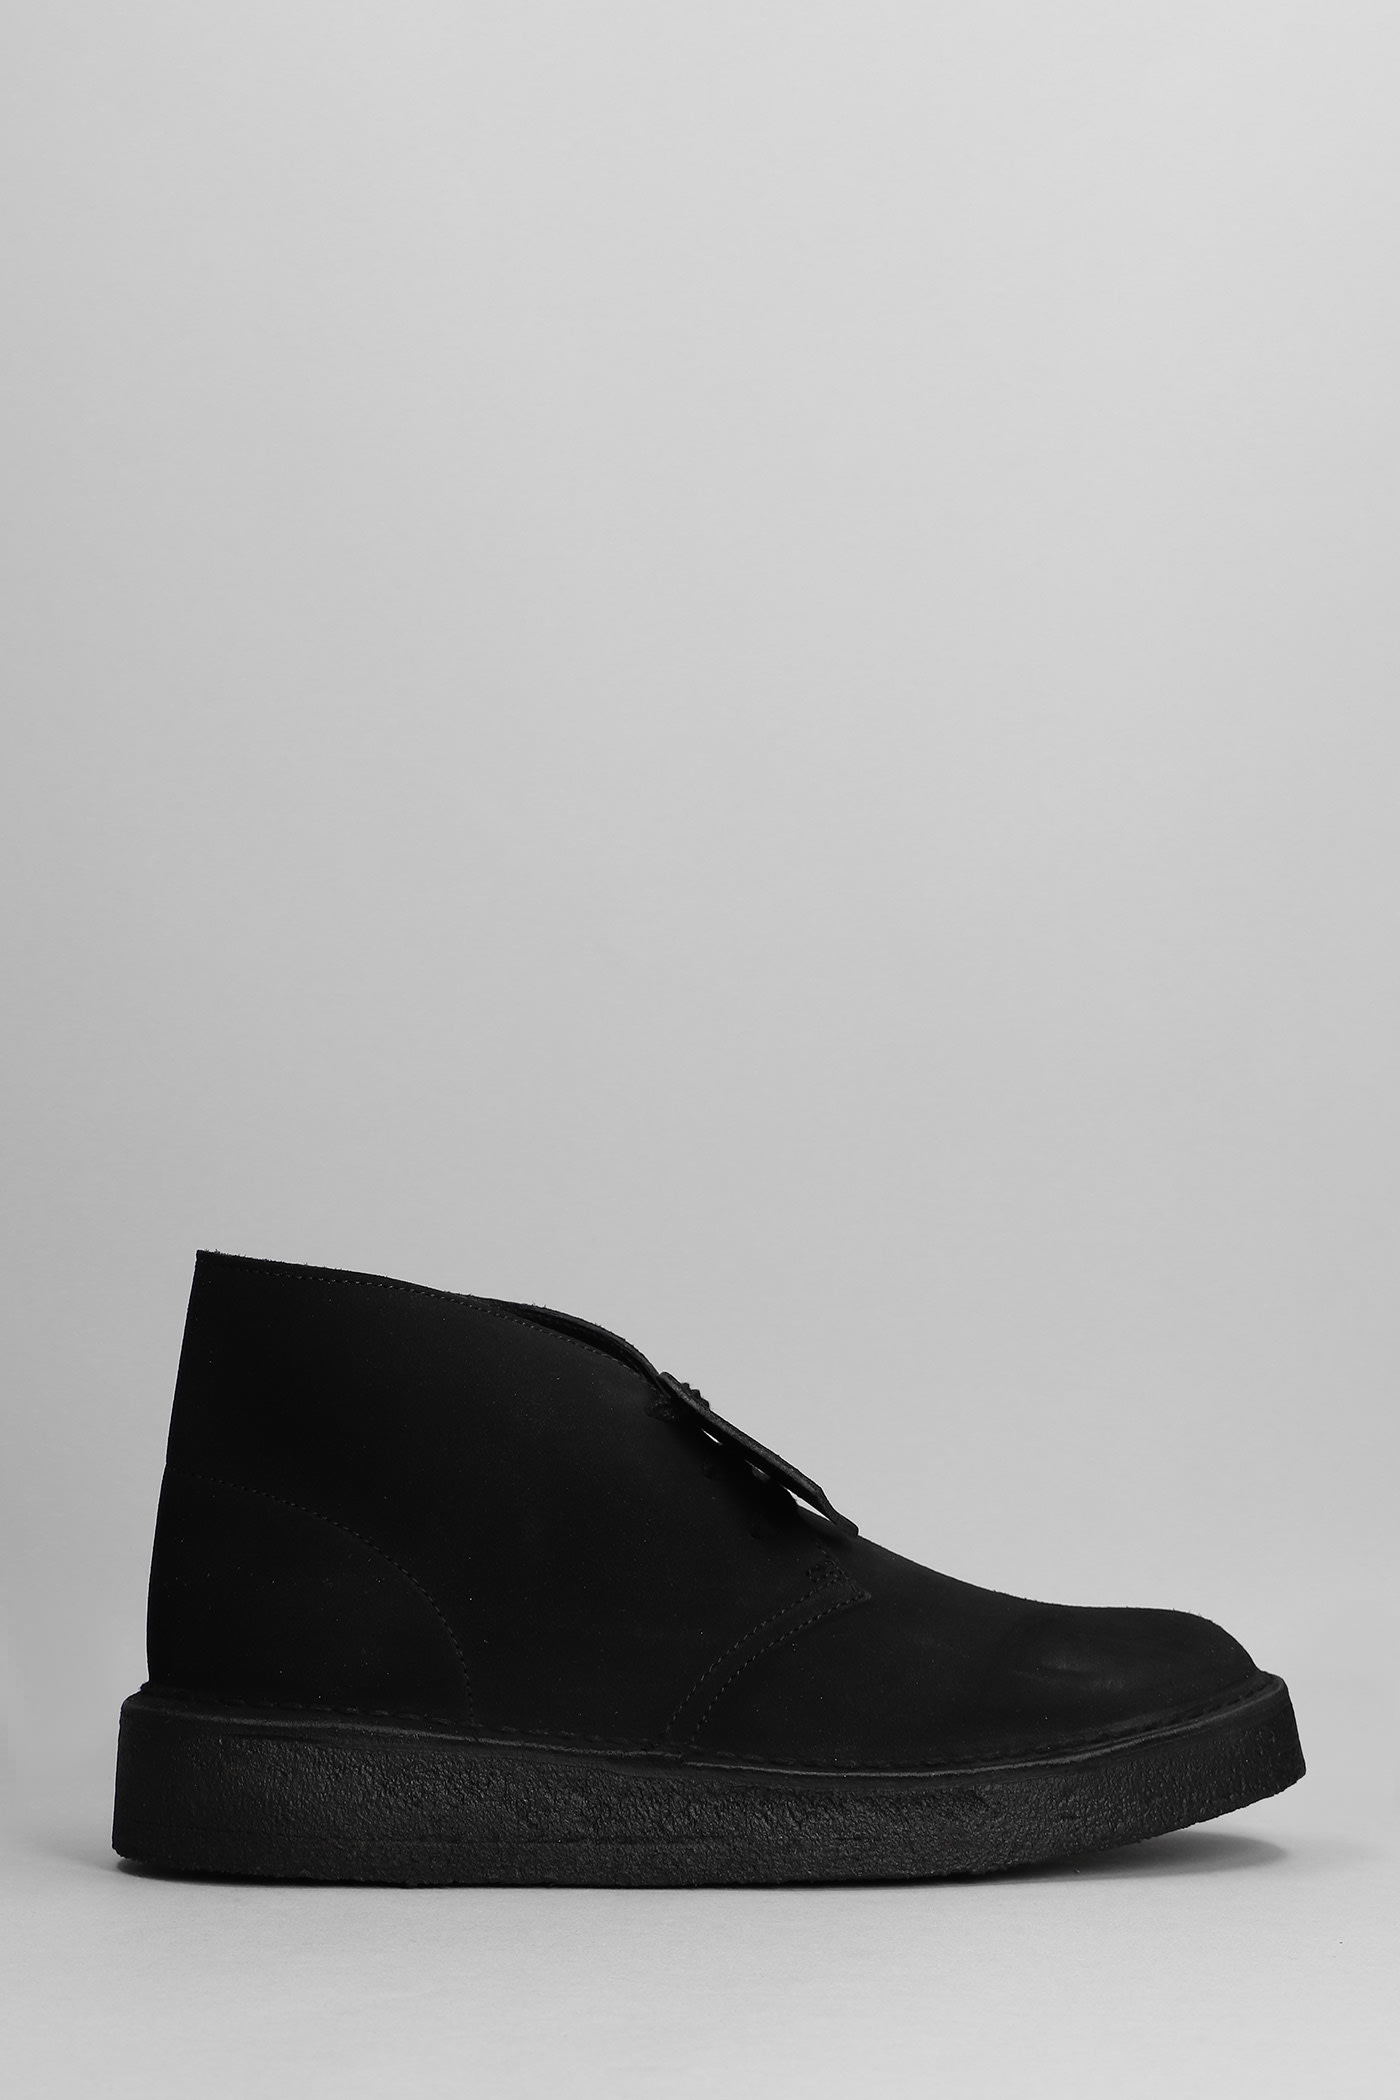 Clarks Desert Coal Lace Up Shoes In Black Suede